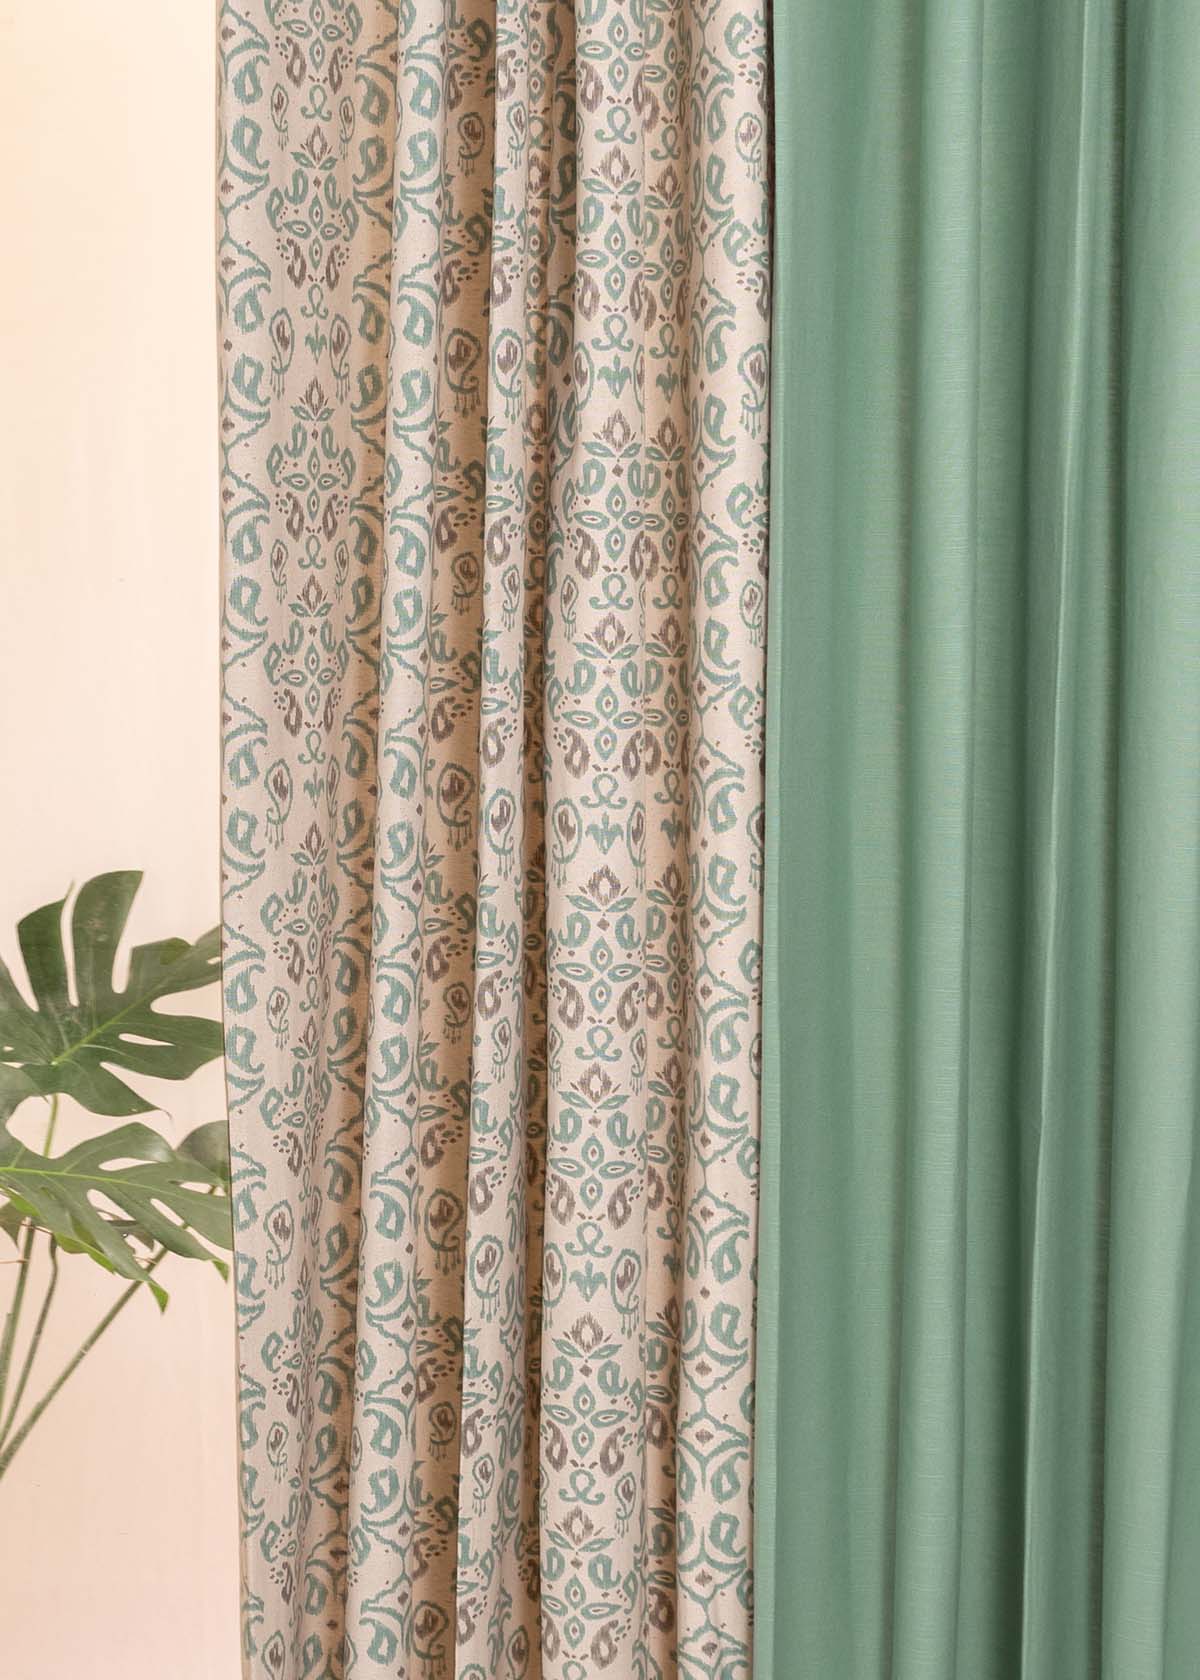 Sage Green Solid, Spice Route Set Of 4 Combo Cotton Curtain - Sage Green